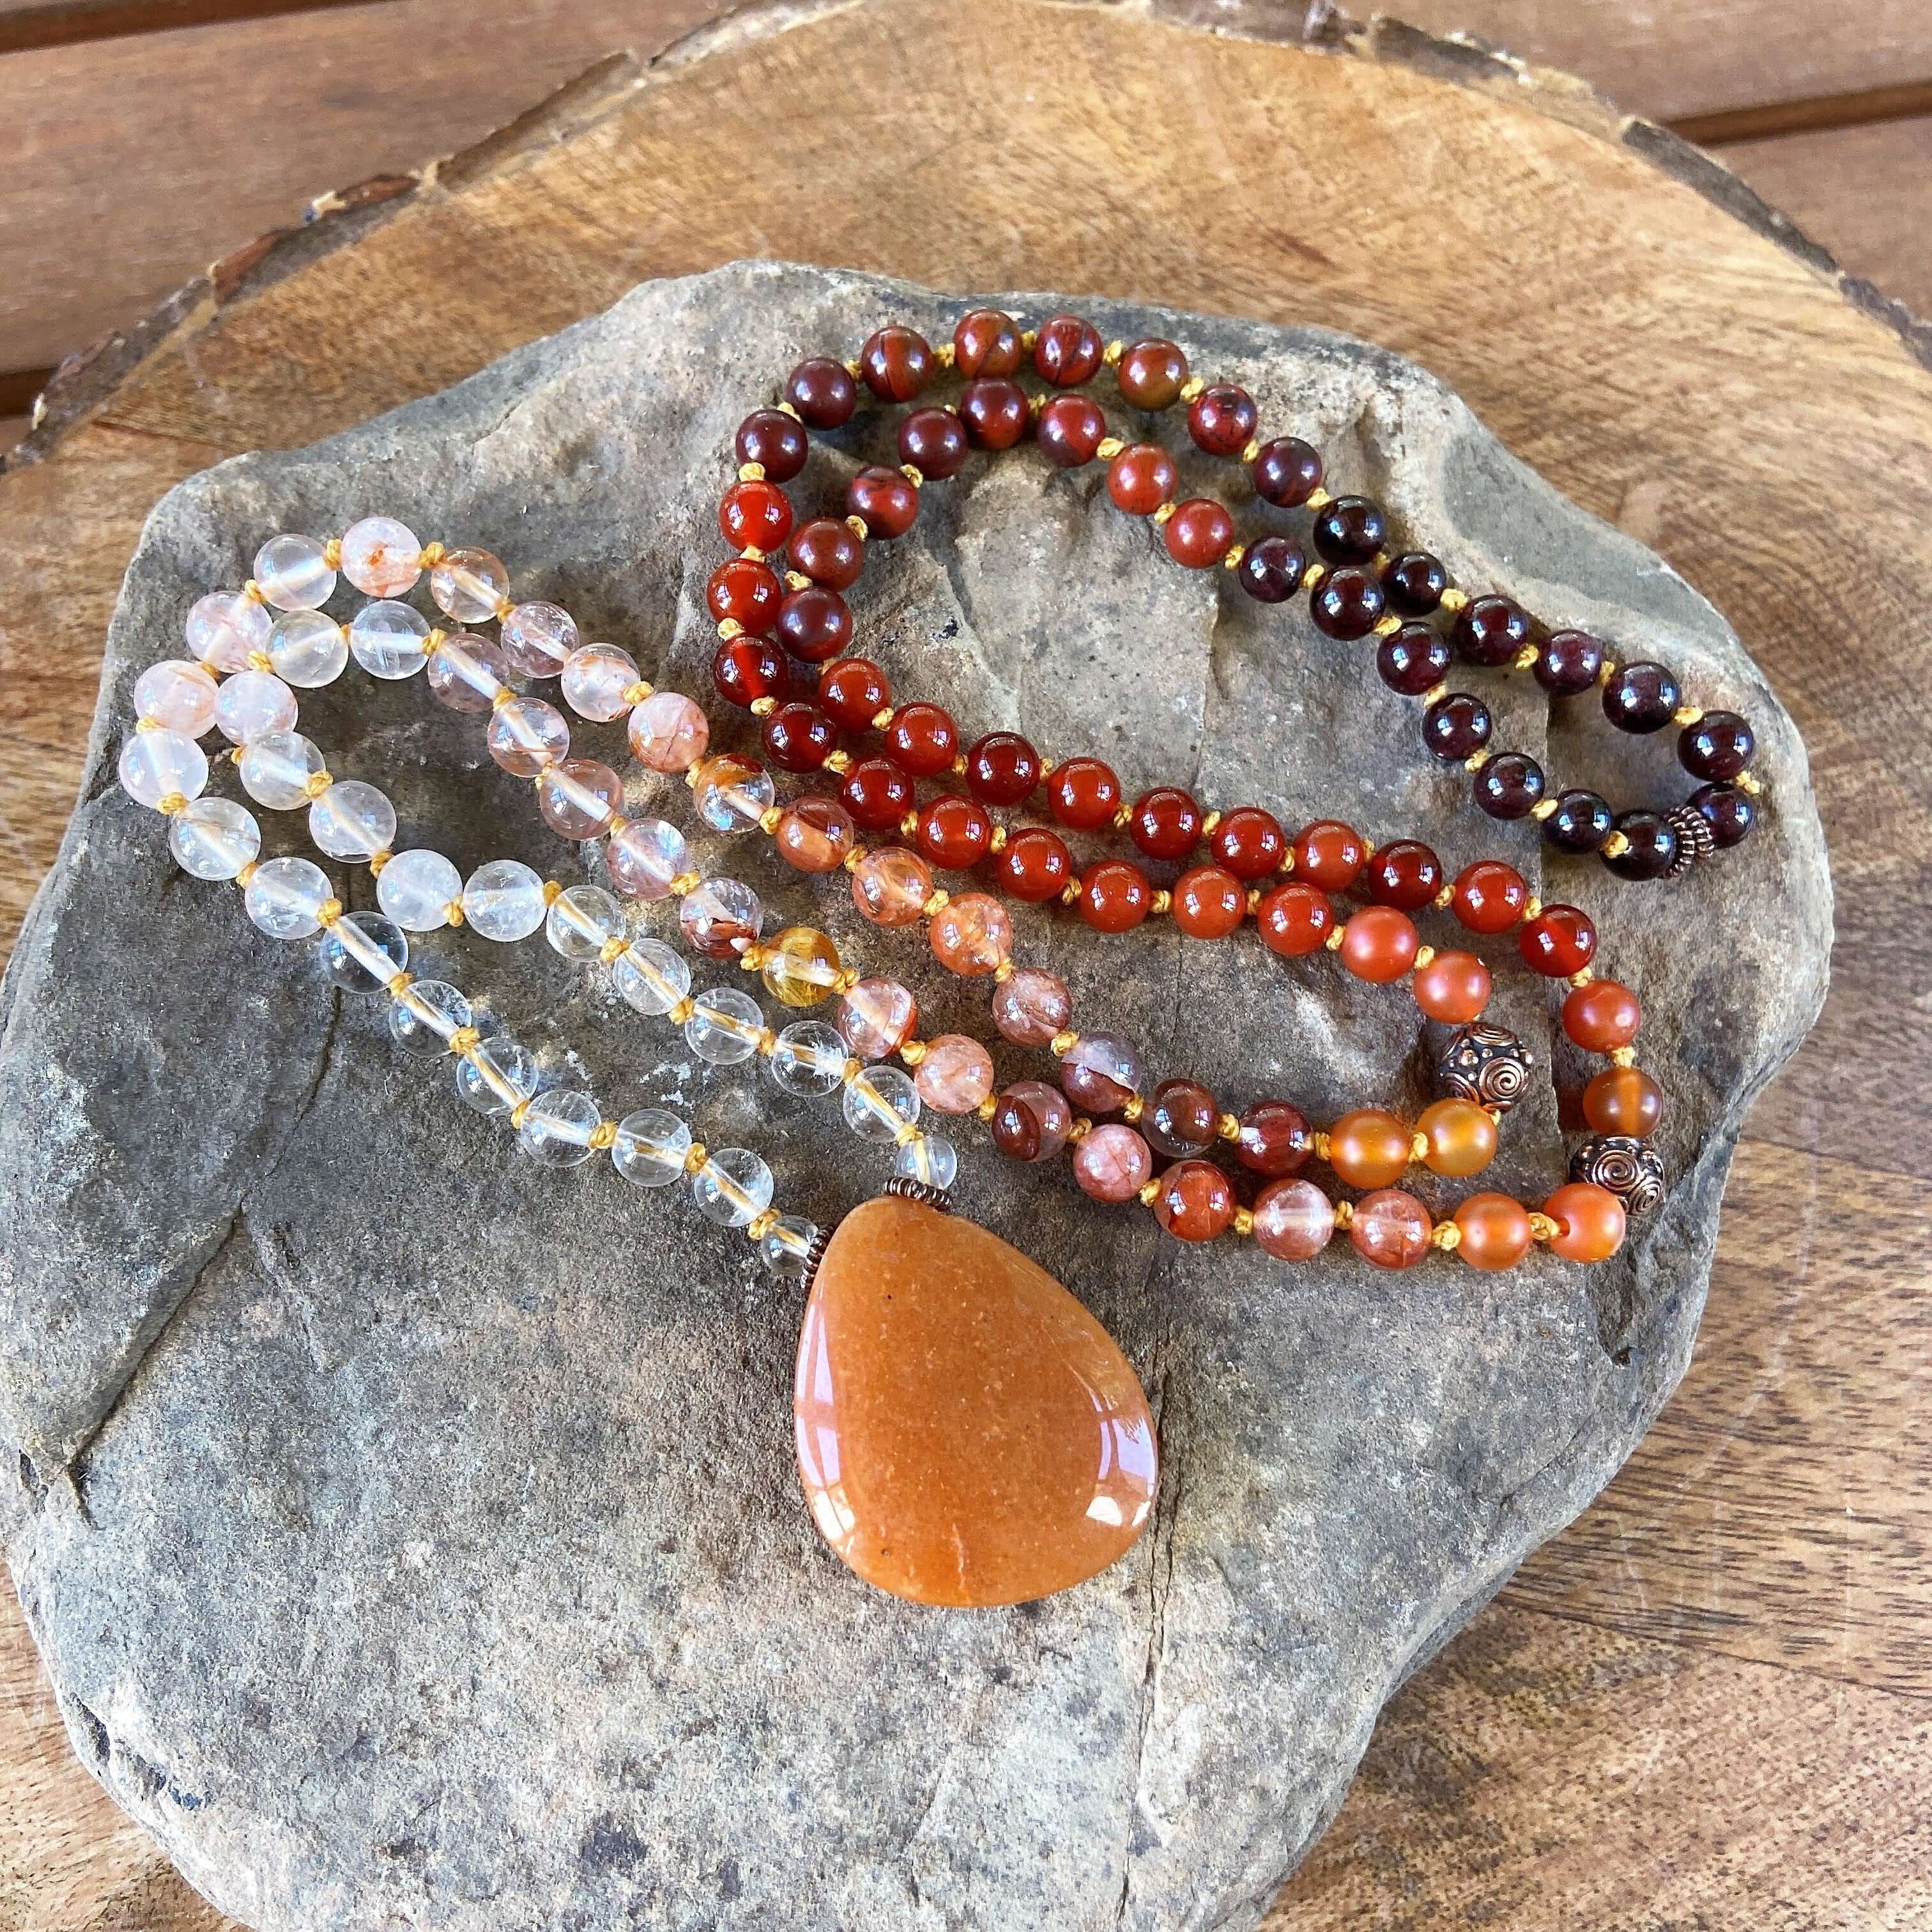 Design Your Own Custom Mala Design and build your own custom piece of jewelry! Work with our designer to create a unique, one-of-a-kind mala necklace made from high-quality crystals and gemstones. Handmade with authentic crystals and gemstones in Minneapo